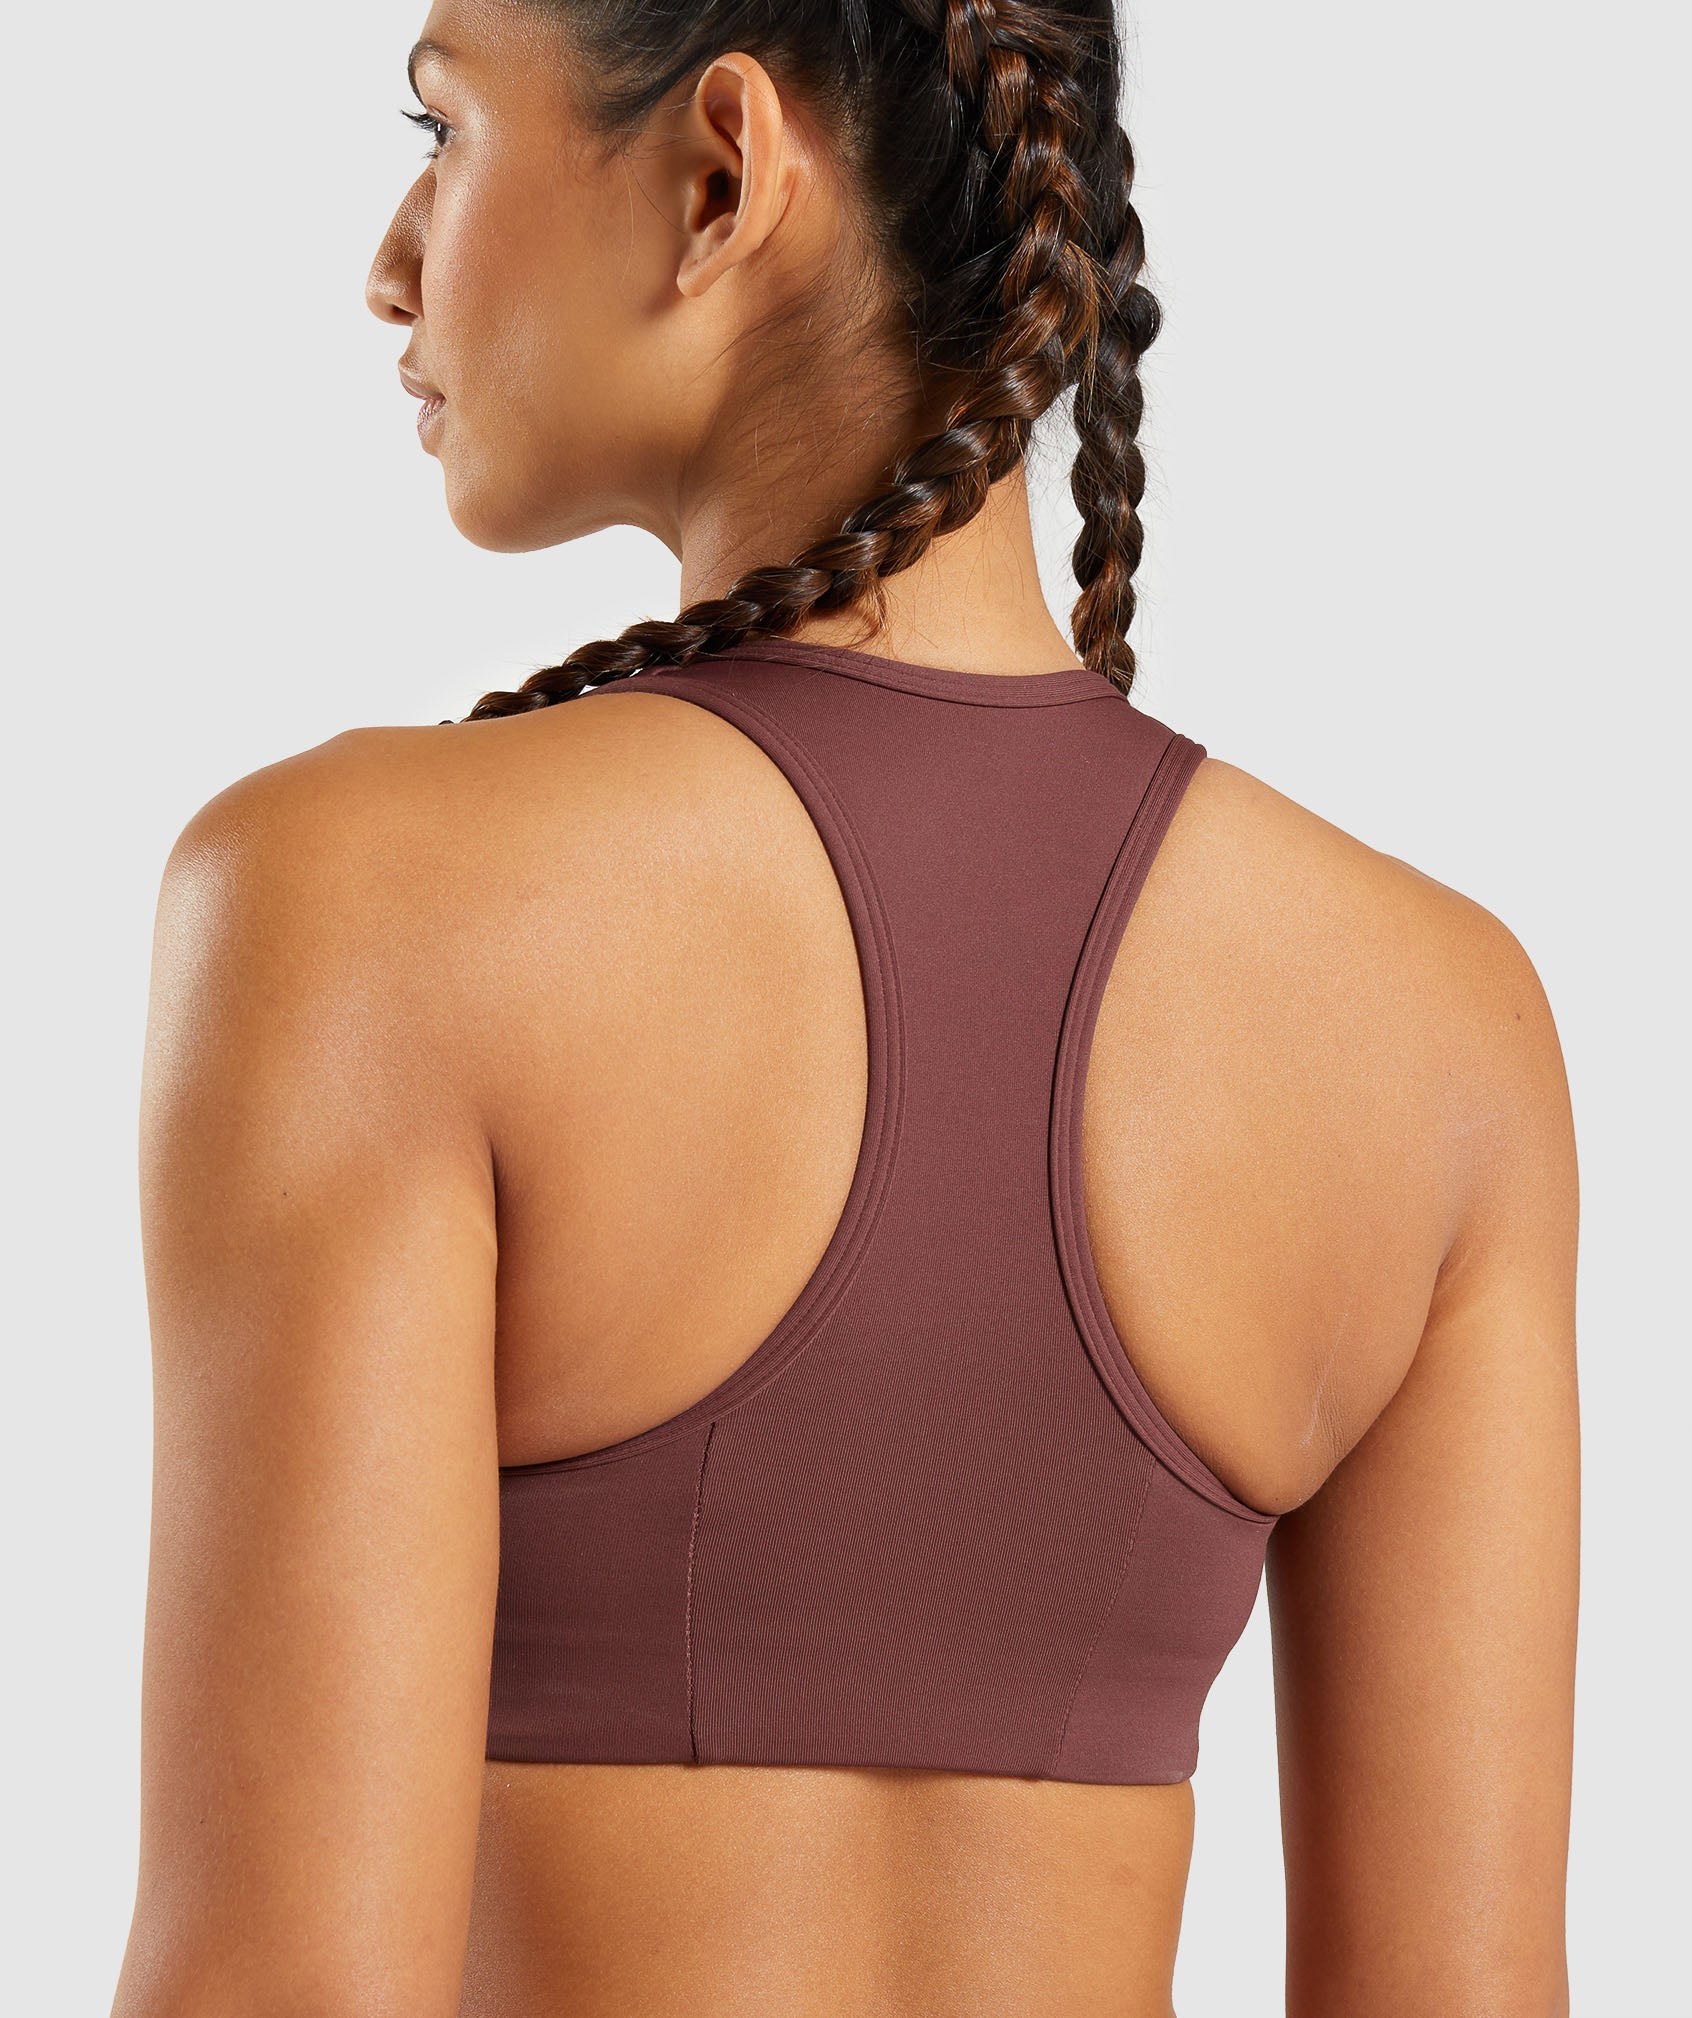 Essential Racer Back Sports Bra in Cherry Brown - view 5